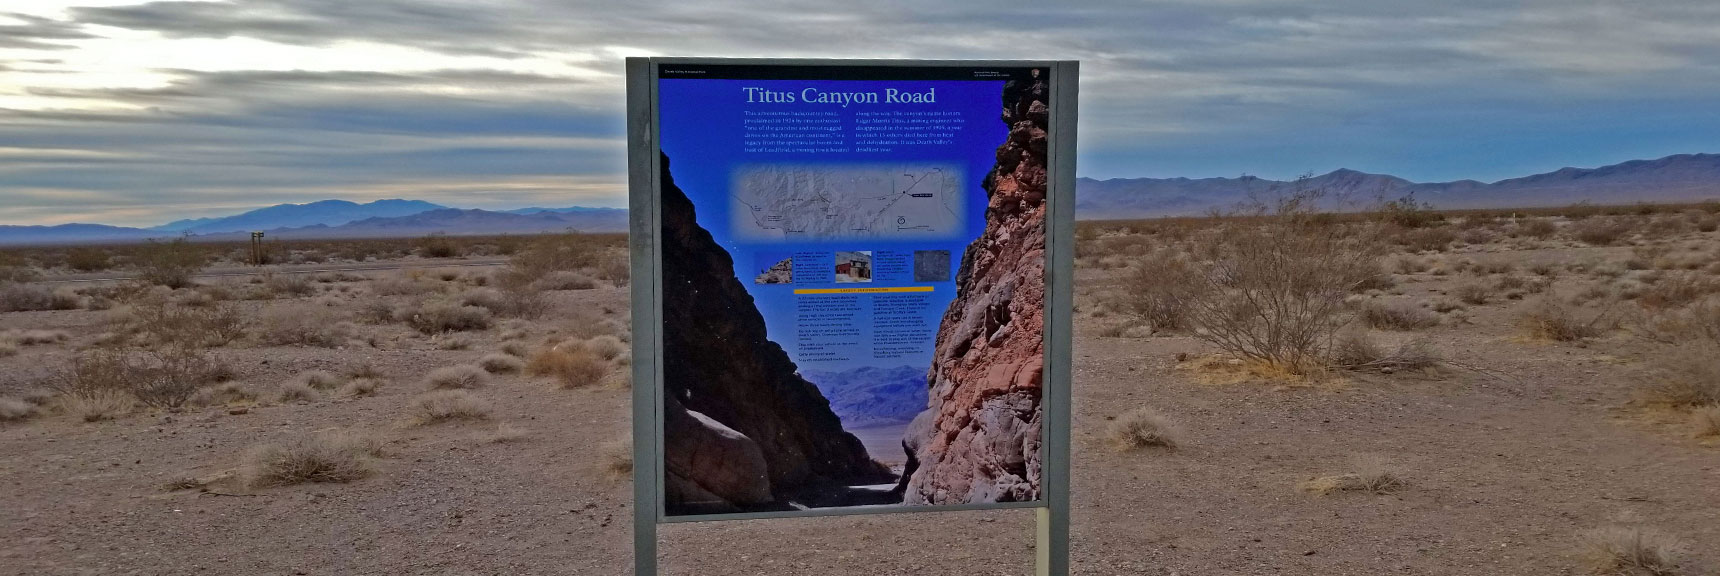 Interpretive Sign Near Titus Canyon Road Upper Entrance | Titus Canyon Grand Loop by Mountain Bike | Death Valley National Park, California